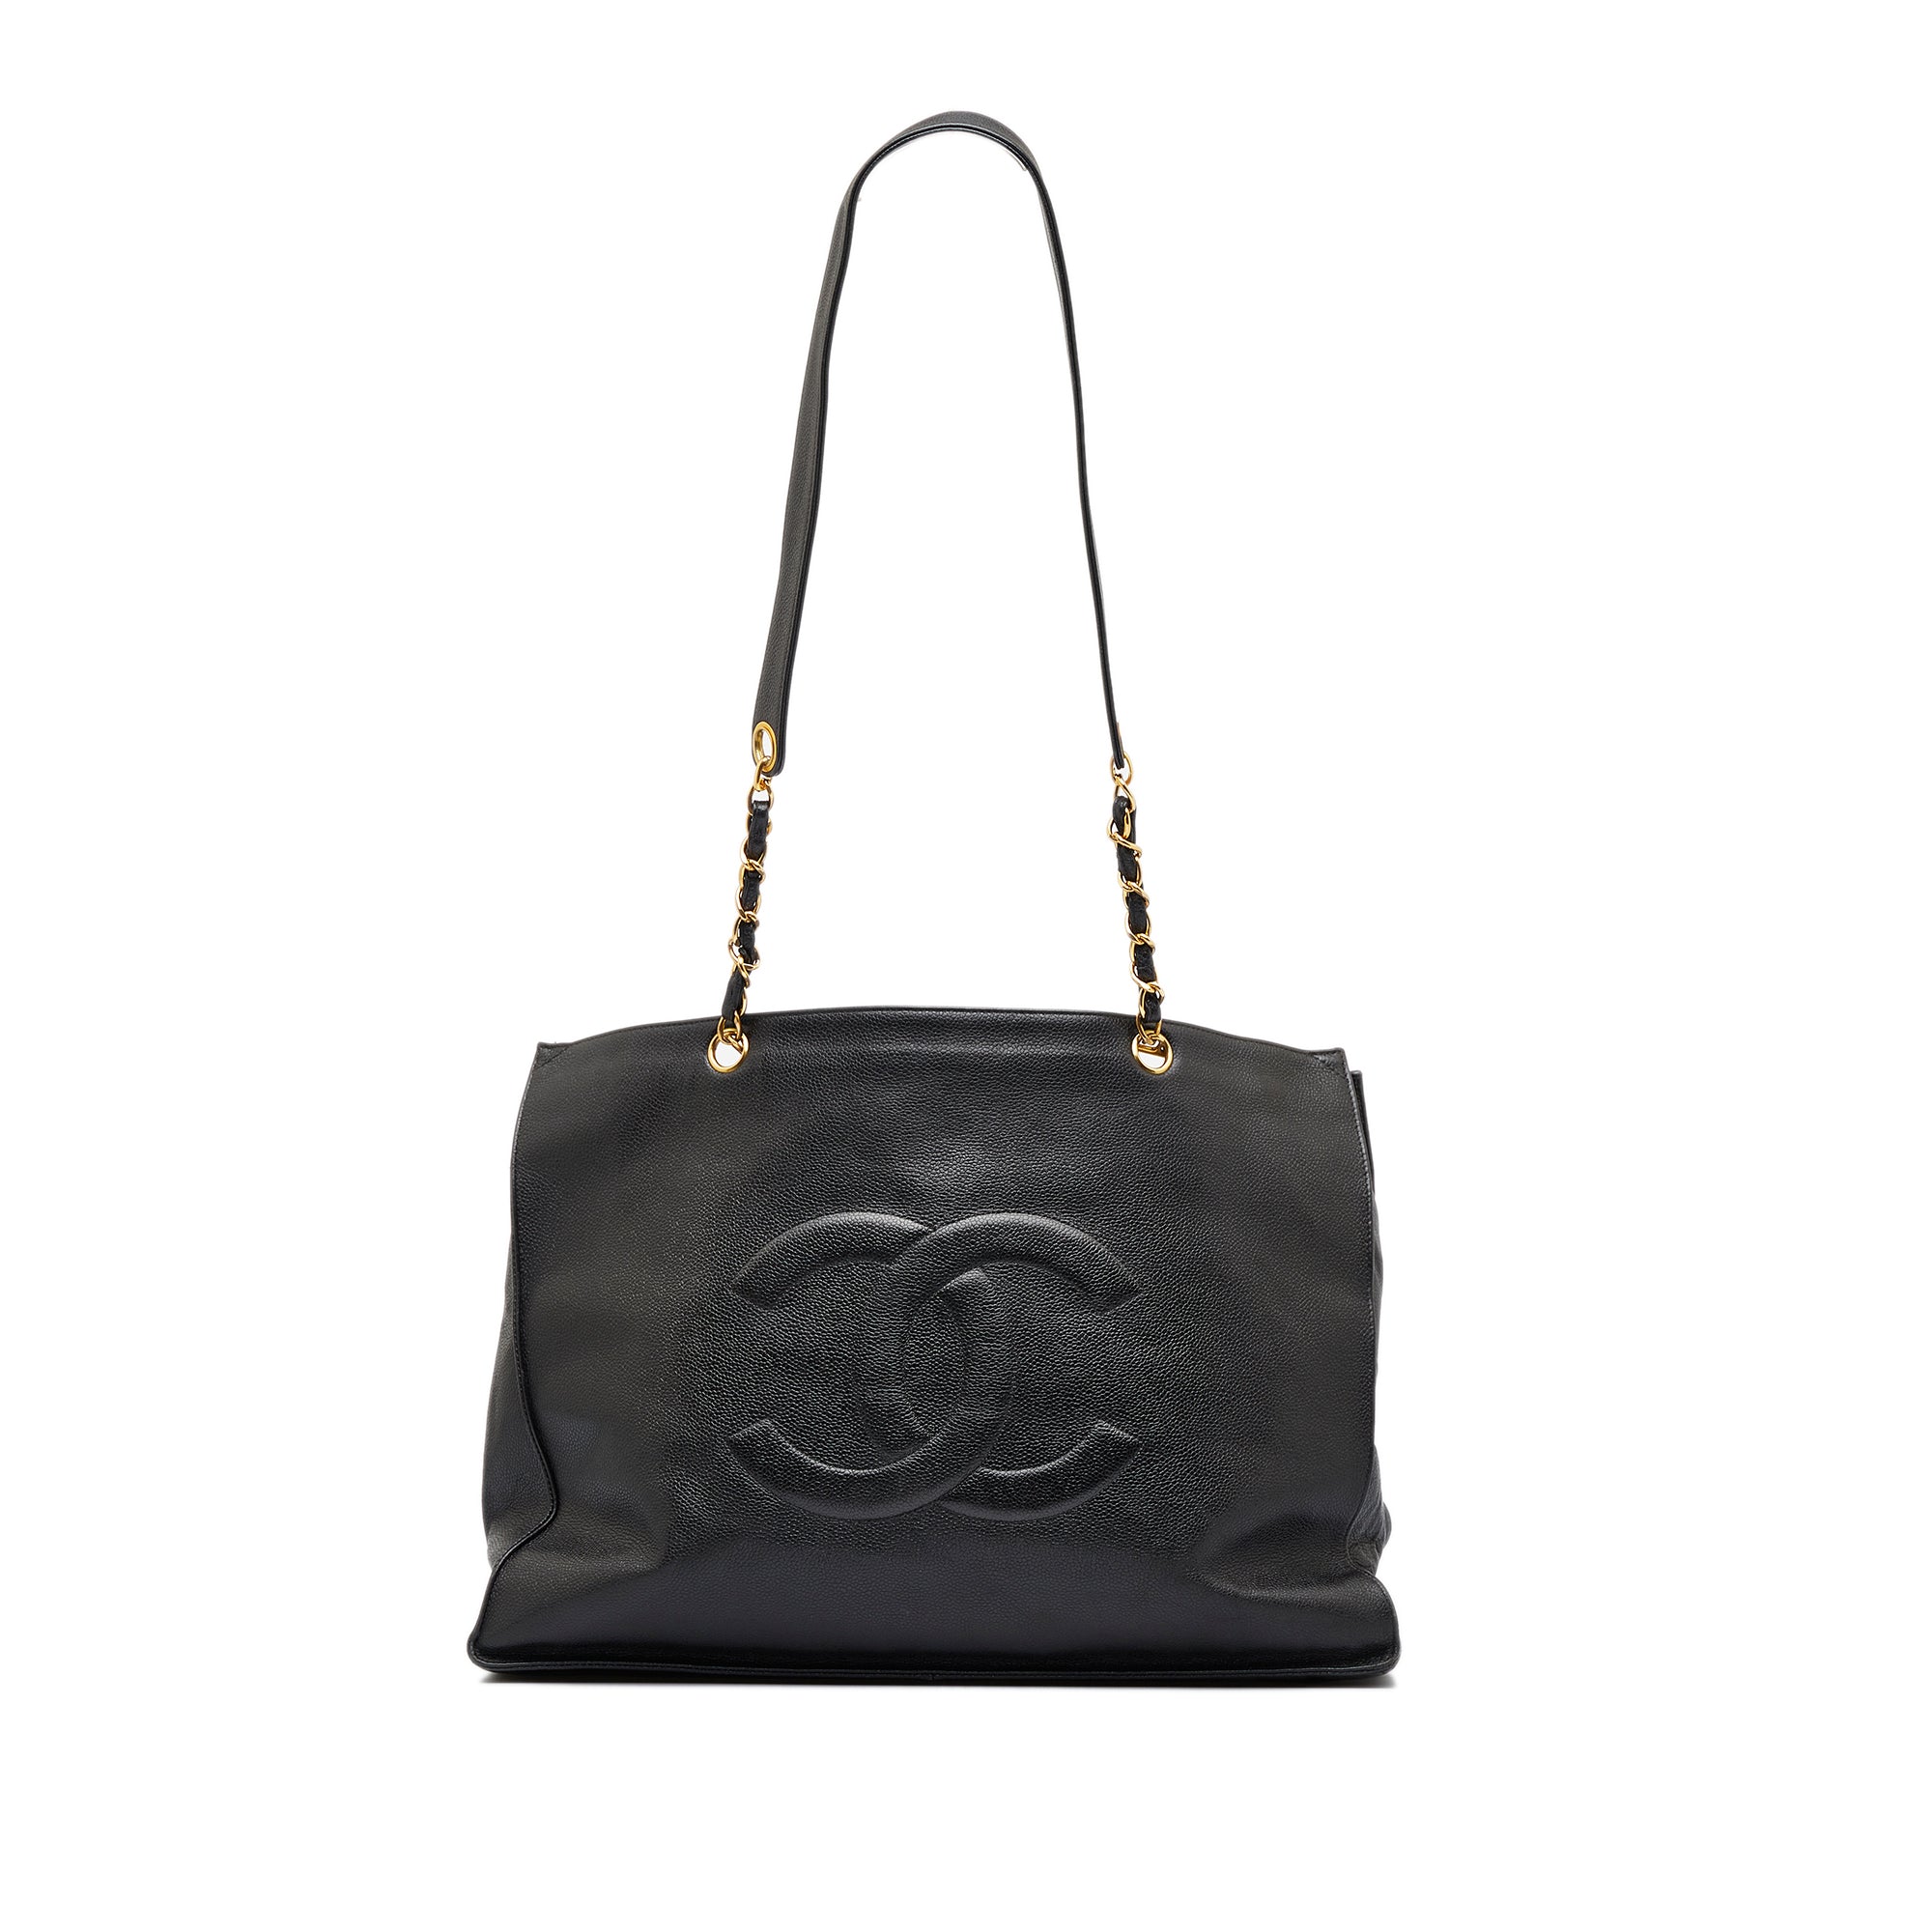 CHANEL Quilted Caviar Leather CC Logo Large Shopper Bag Black